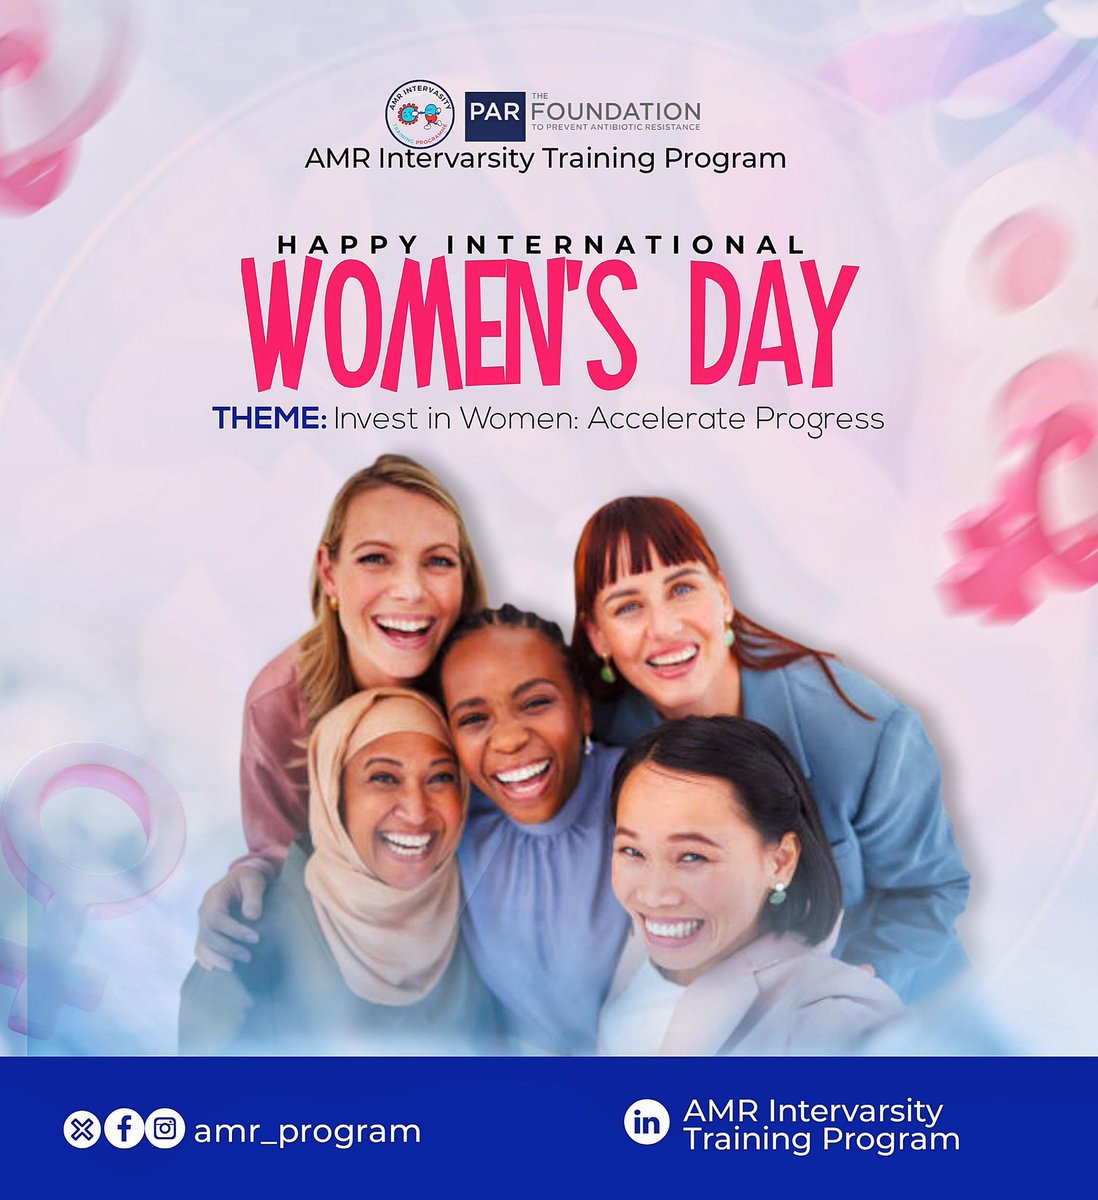 We celebrate the remarkable achievements, strength, and resilience of women worldwide. Let's continue to empower, support, and uplift each other as we strive for equality and progress. Happy International Women's Day from Antimicrobial Intervarsity Training Program. 💙💙💙